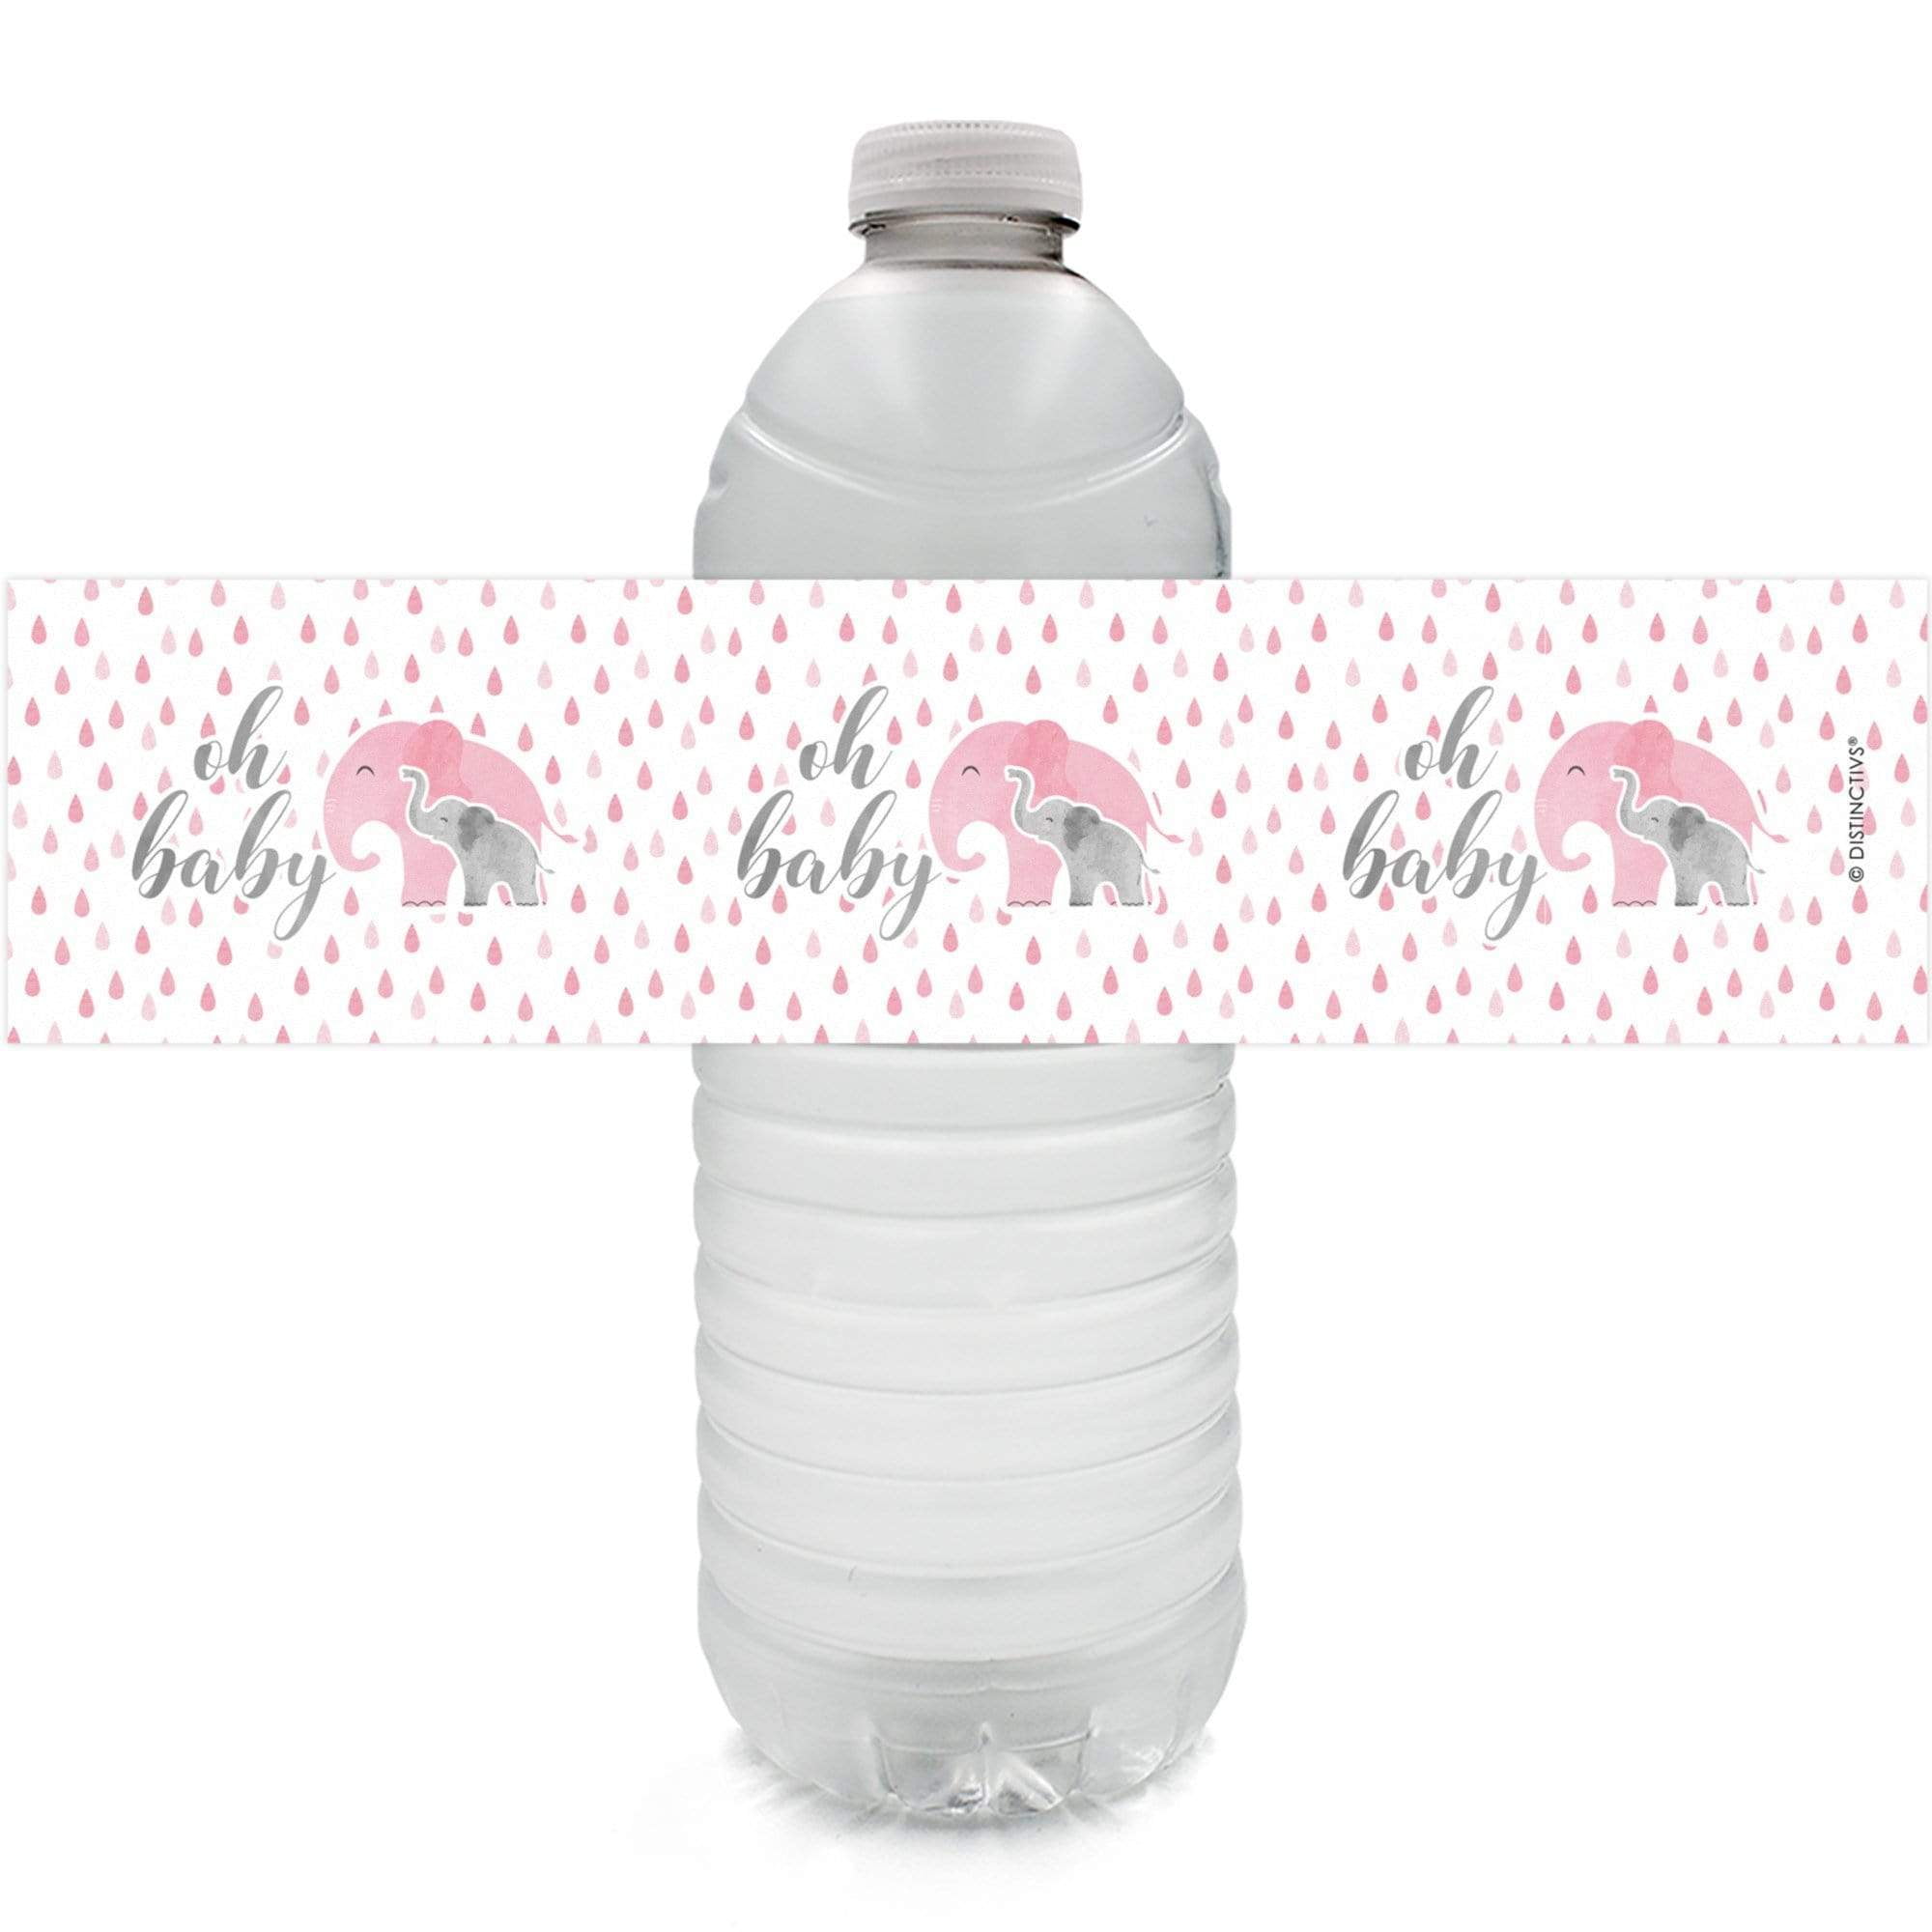 Mom and Baby Elephant Baby Shower Theme Water Bottle Labels Will go great with your Event or Celebration cute animal theme